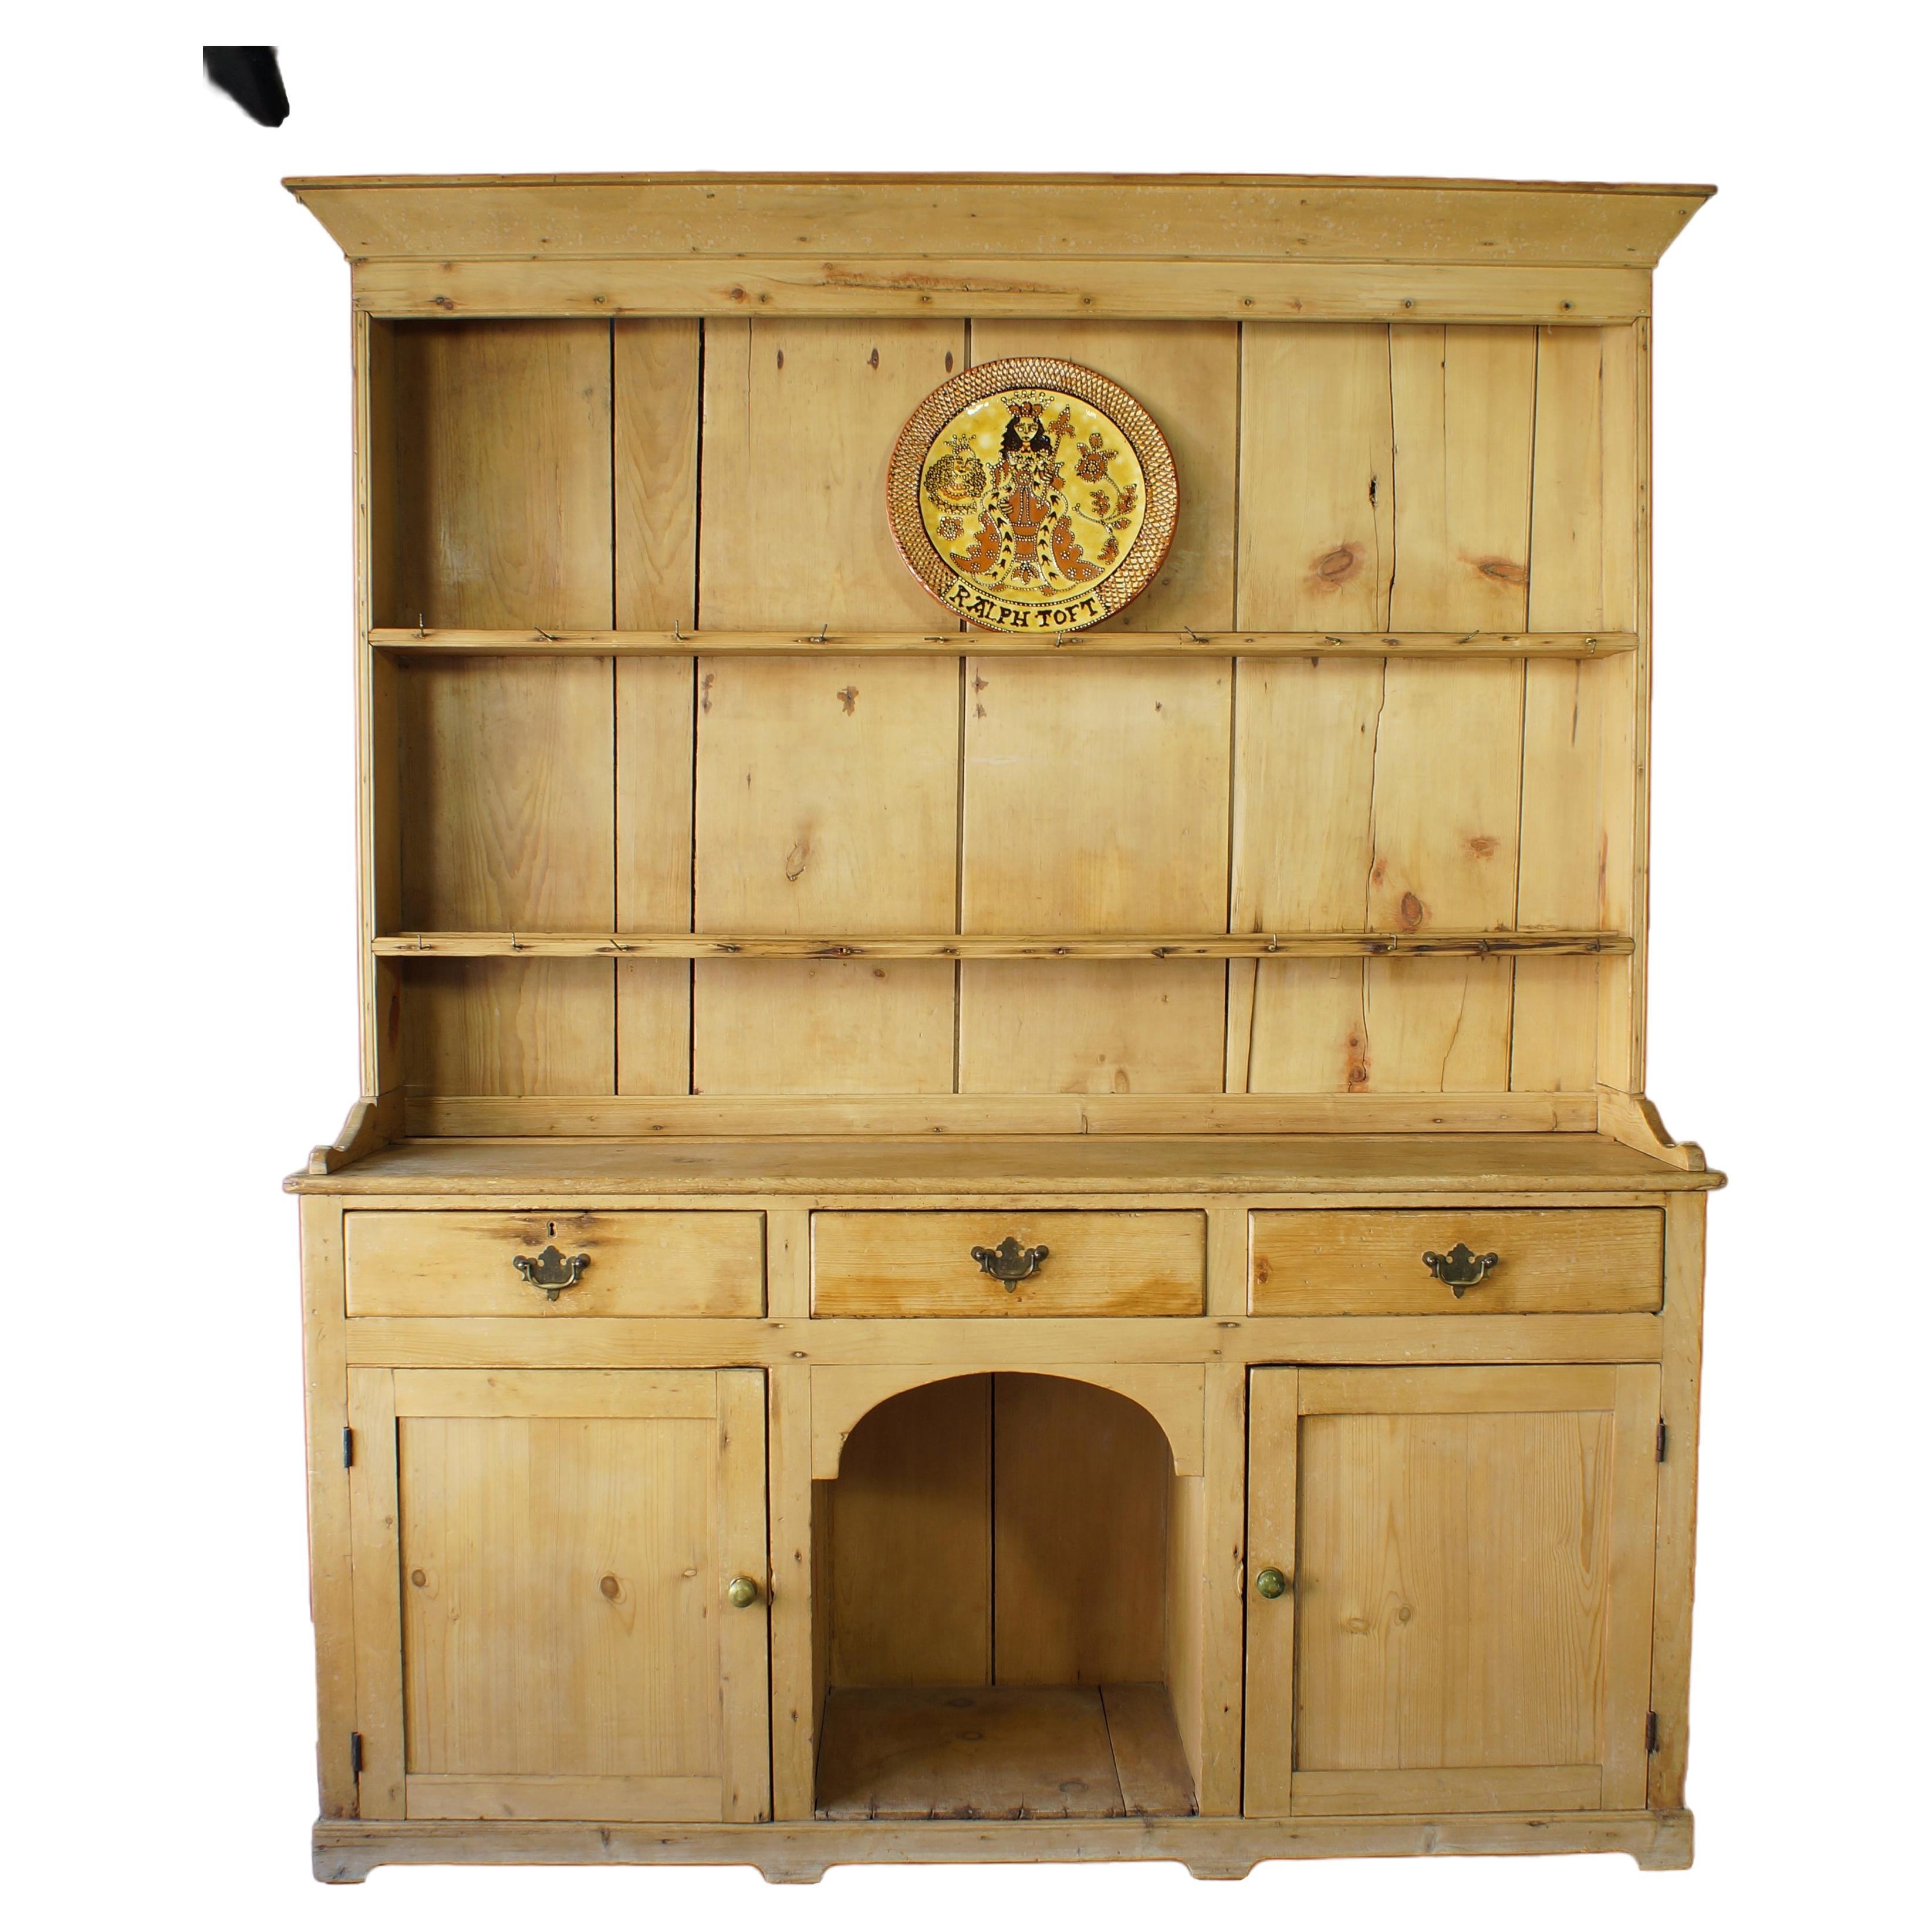 What wood are Welsh dressers from?